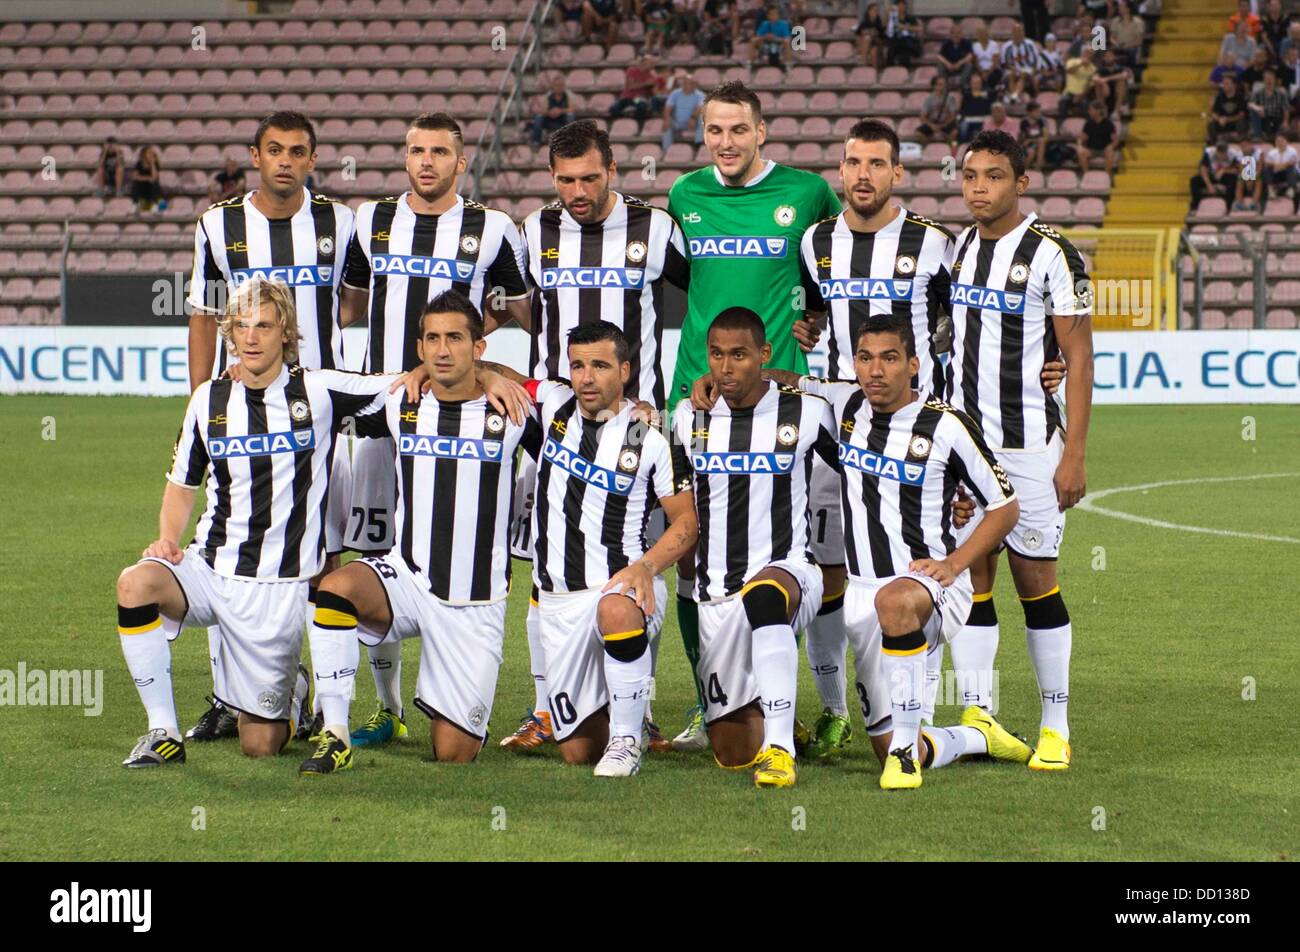 Udinese team group line-up, AUGUST 22, 2013 - Football / Soccer : UEFA Europa League Play-off 1st leg match between Udinese 1-3 Slovan Liberec at Nereo Rocco Stadium in Trieste, Italy. (Photo by Maurizio Borsari/AFLO) Stock Photo